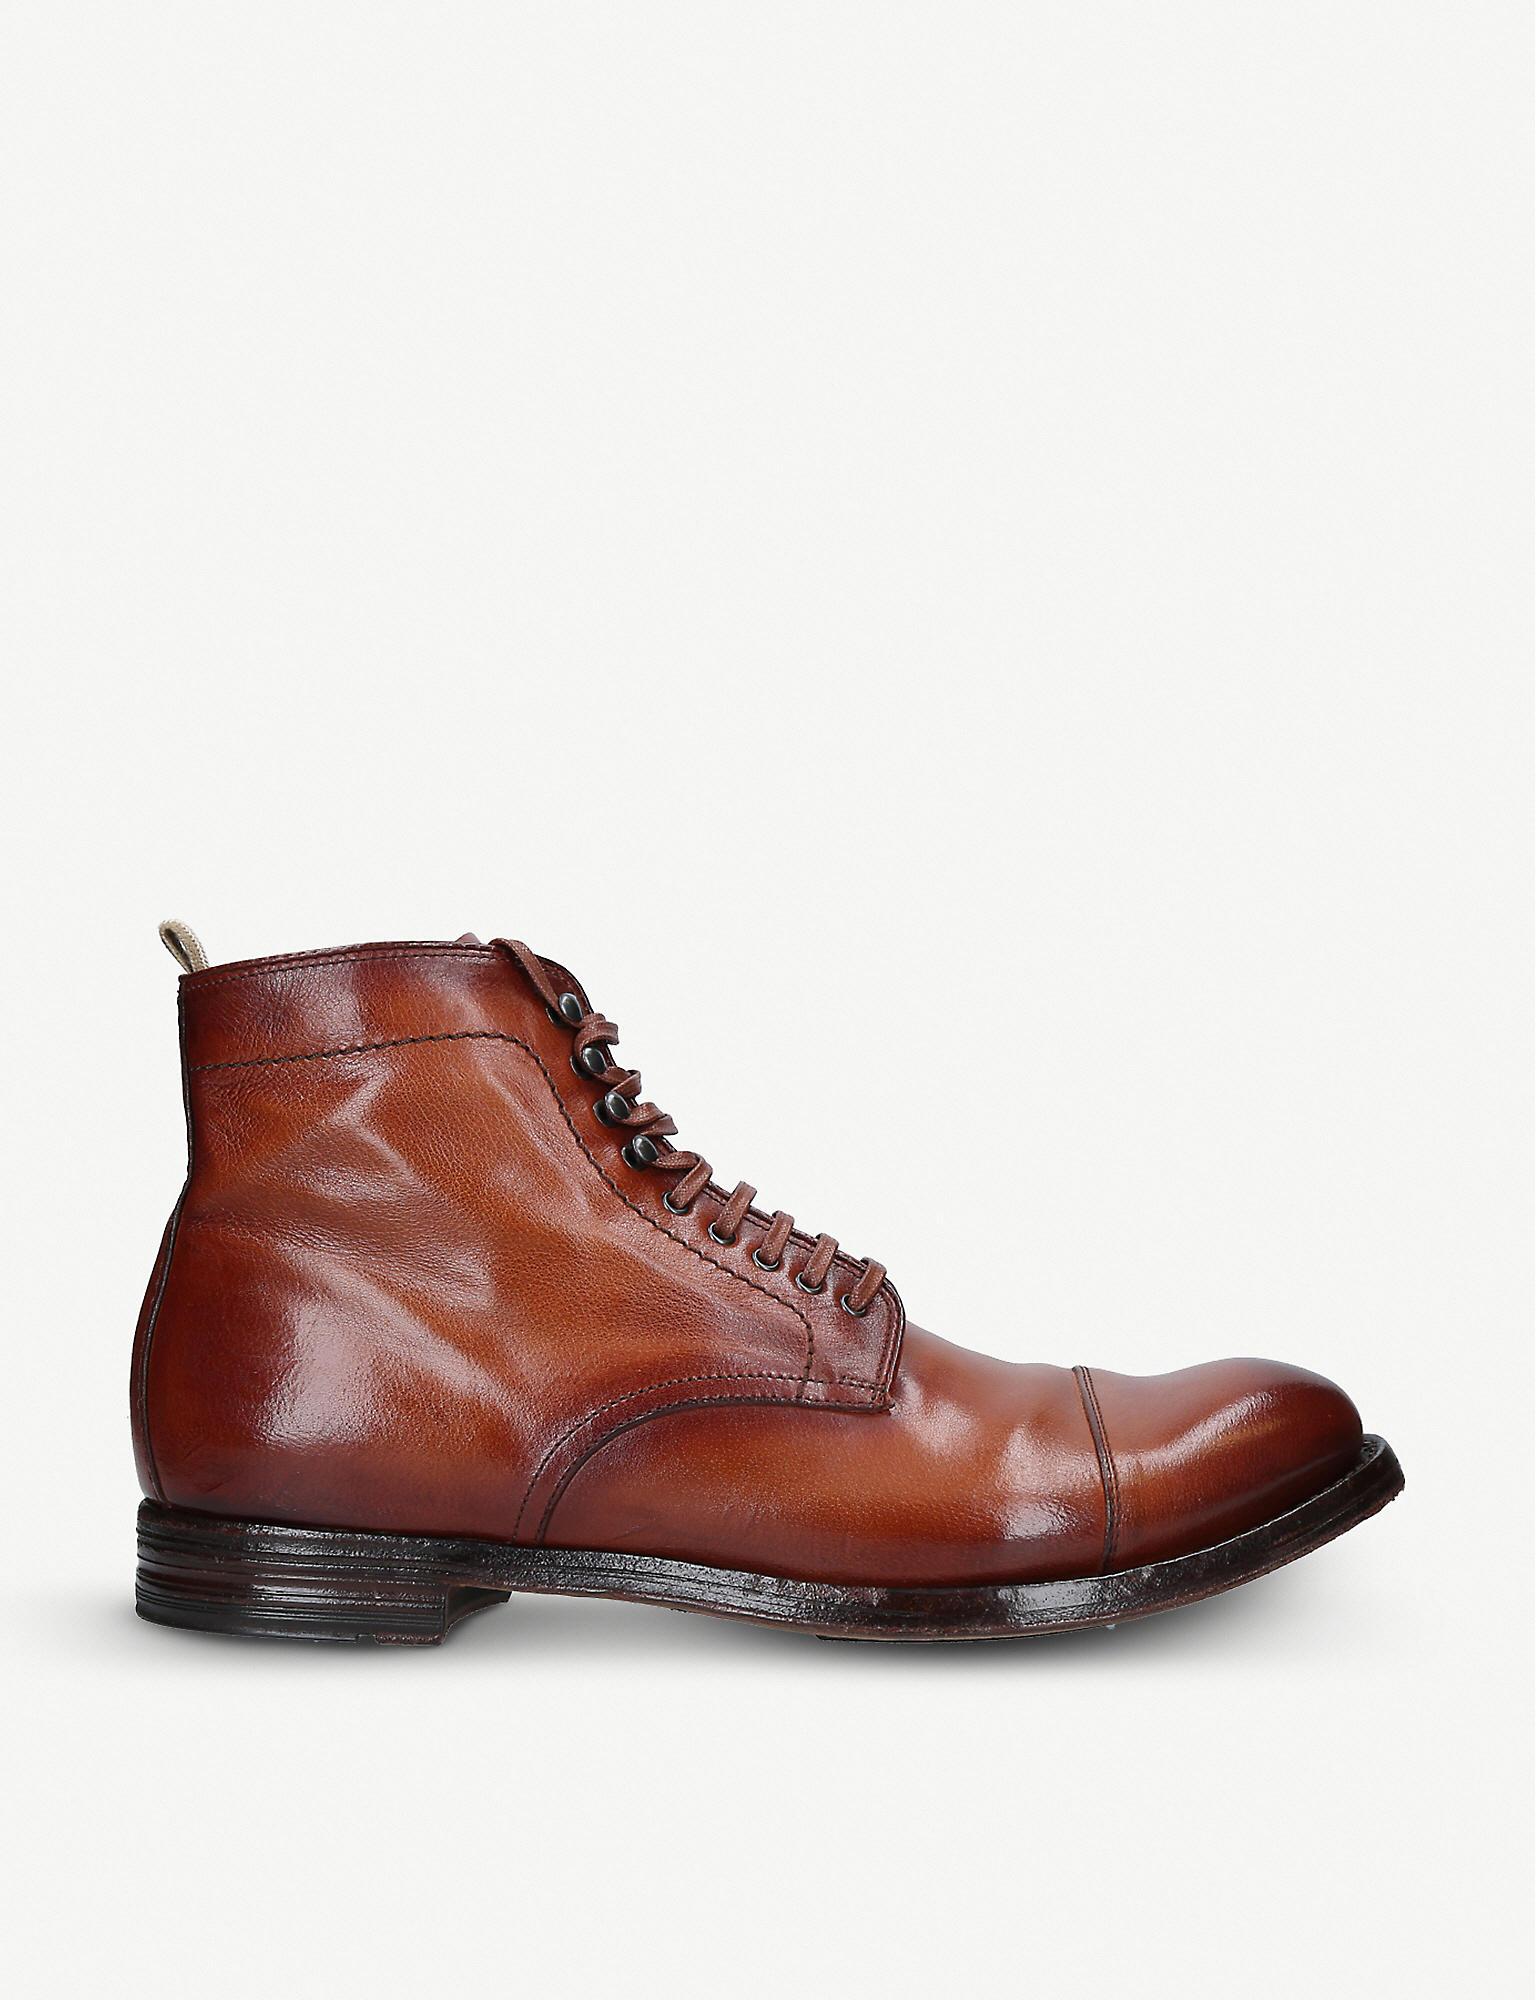 Officine Creative Anatomia 16 Leather Ankle Boots in Brown for Men | Lyst